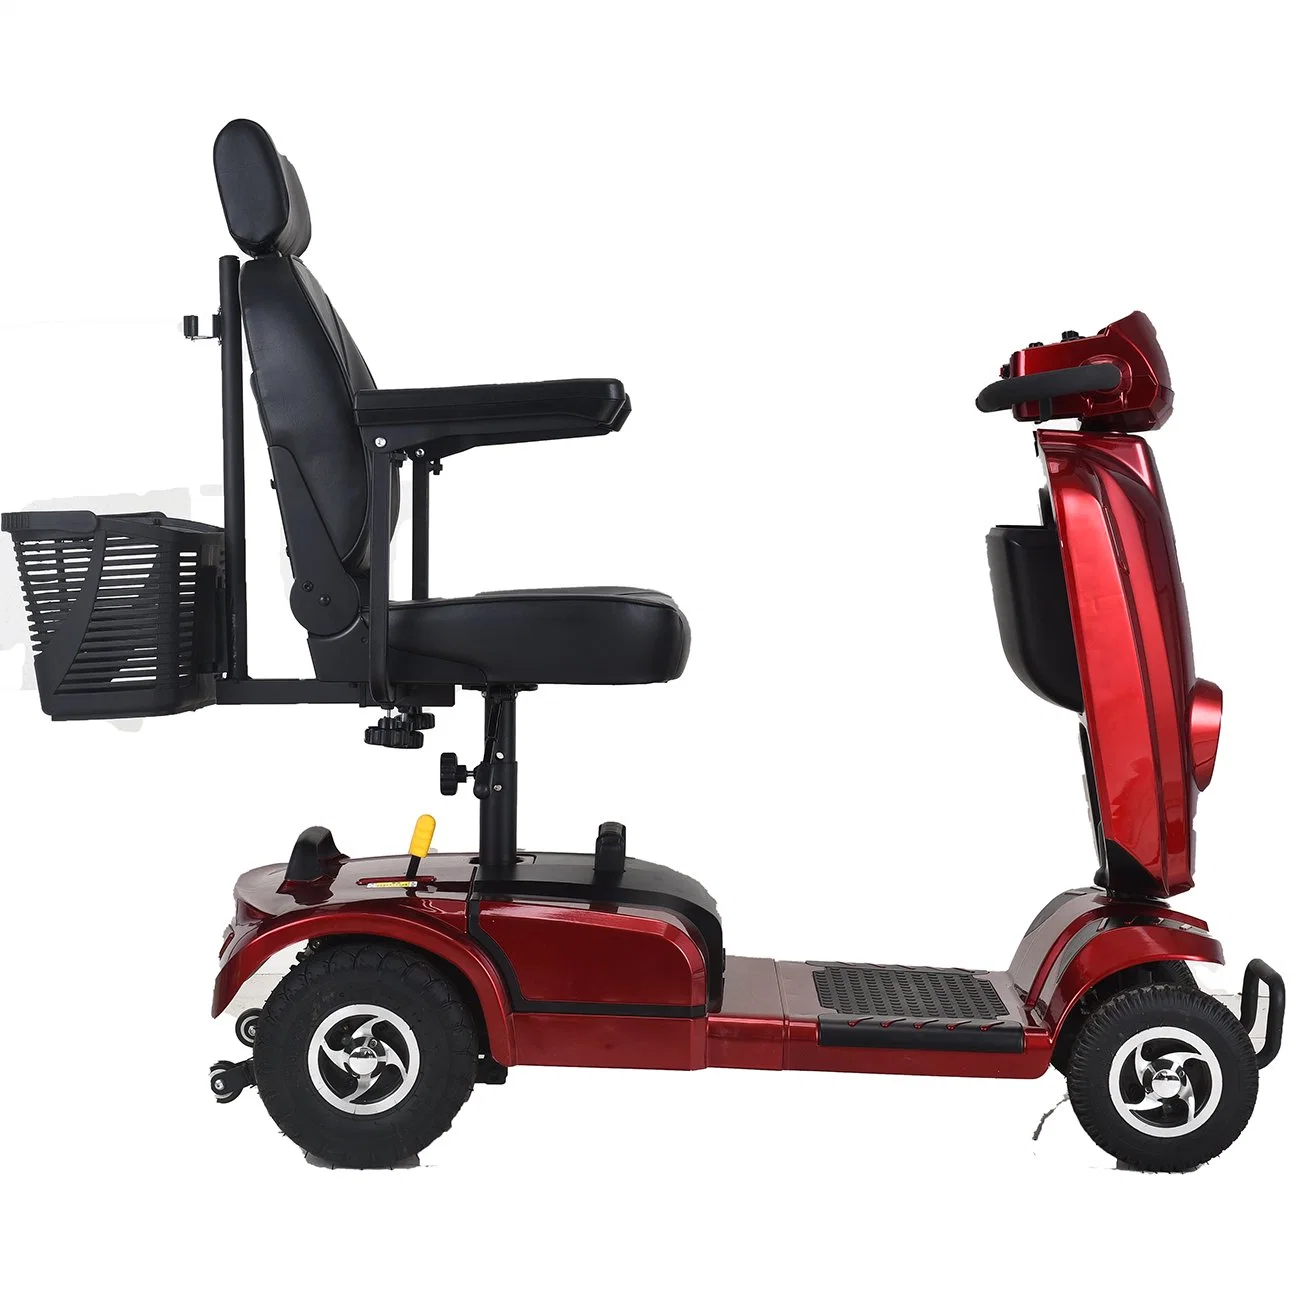 Wholesale 4wheels Foldable Heavy Duty Electric Mobility Handicap Scooter for Disabled People